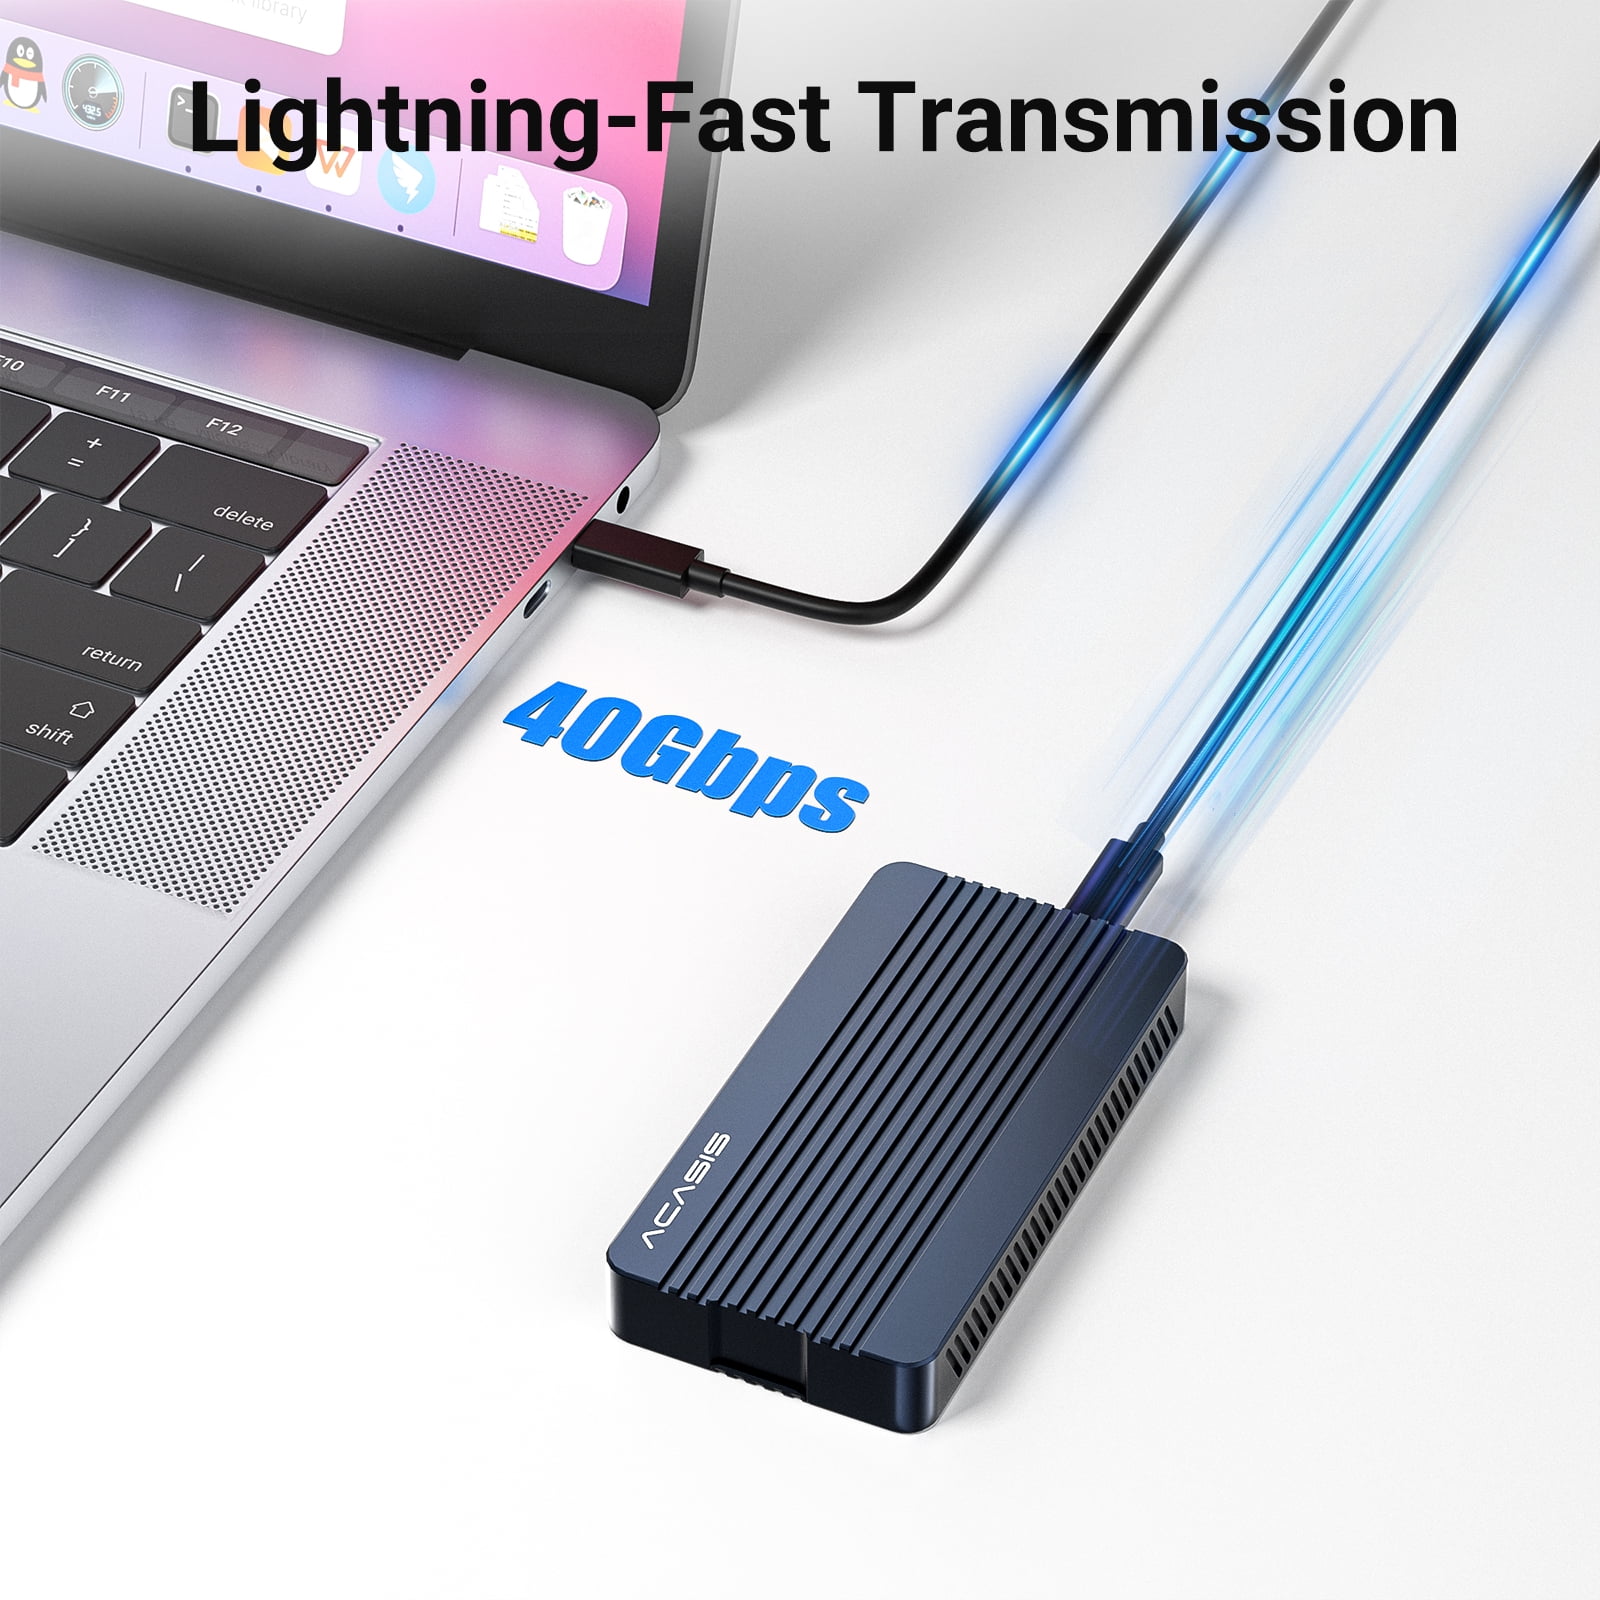 Acasis 40Gbps M.2 Nvme SSD Enclosure Compatible with Thunderbolt 3/4, USB  4.0/3.2/3.1/3.0/2.0, TBU401